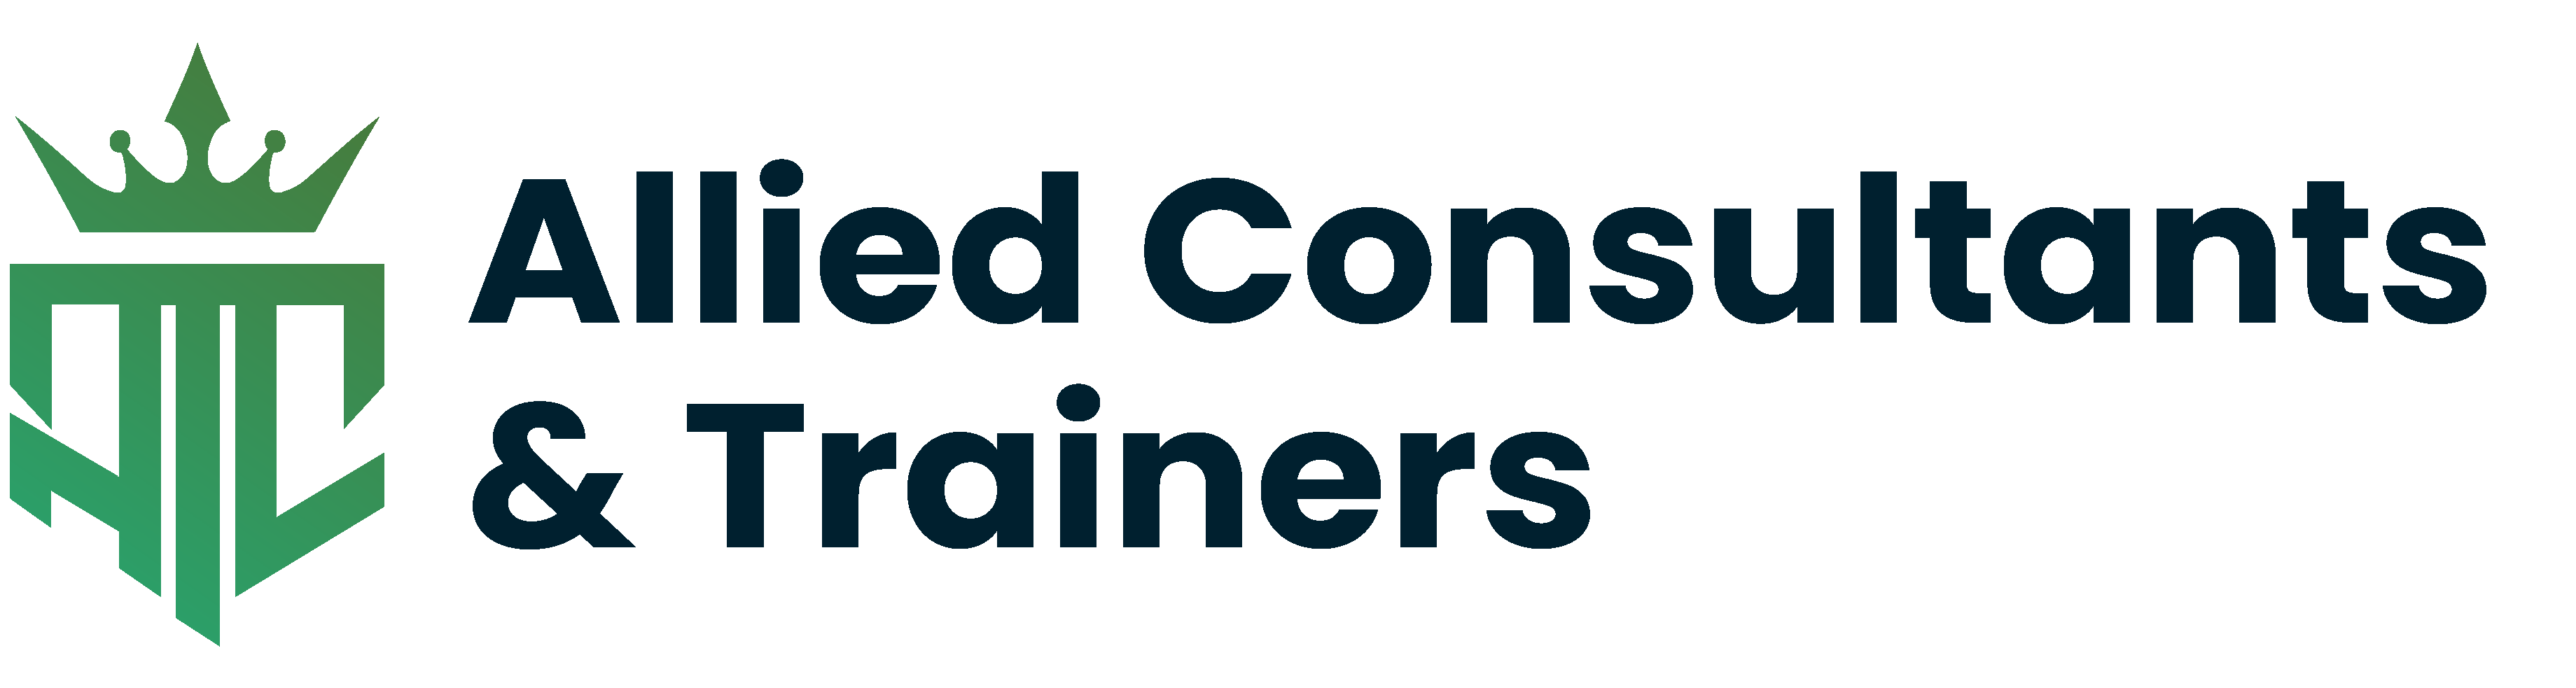 Allied Consultants & Trainers